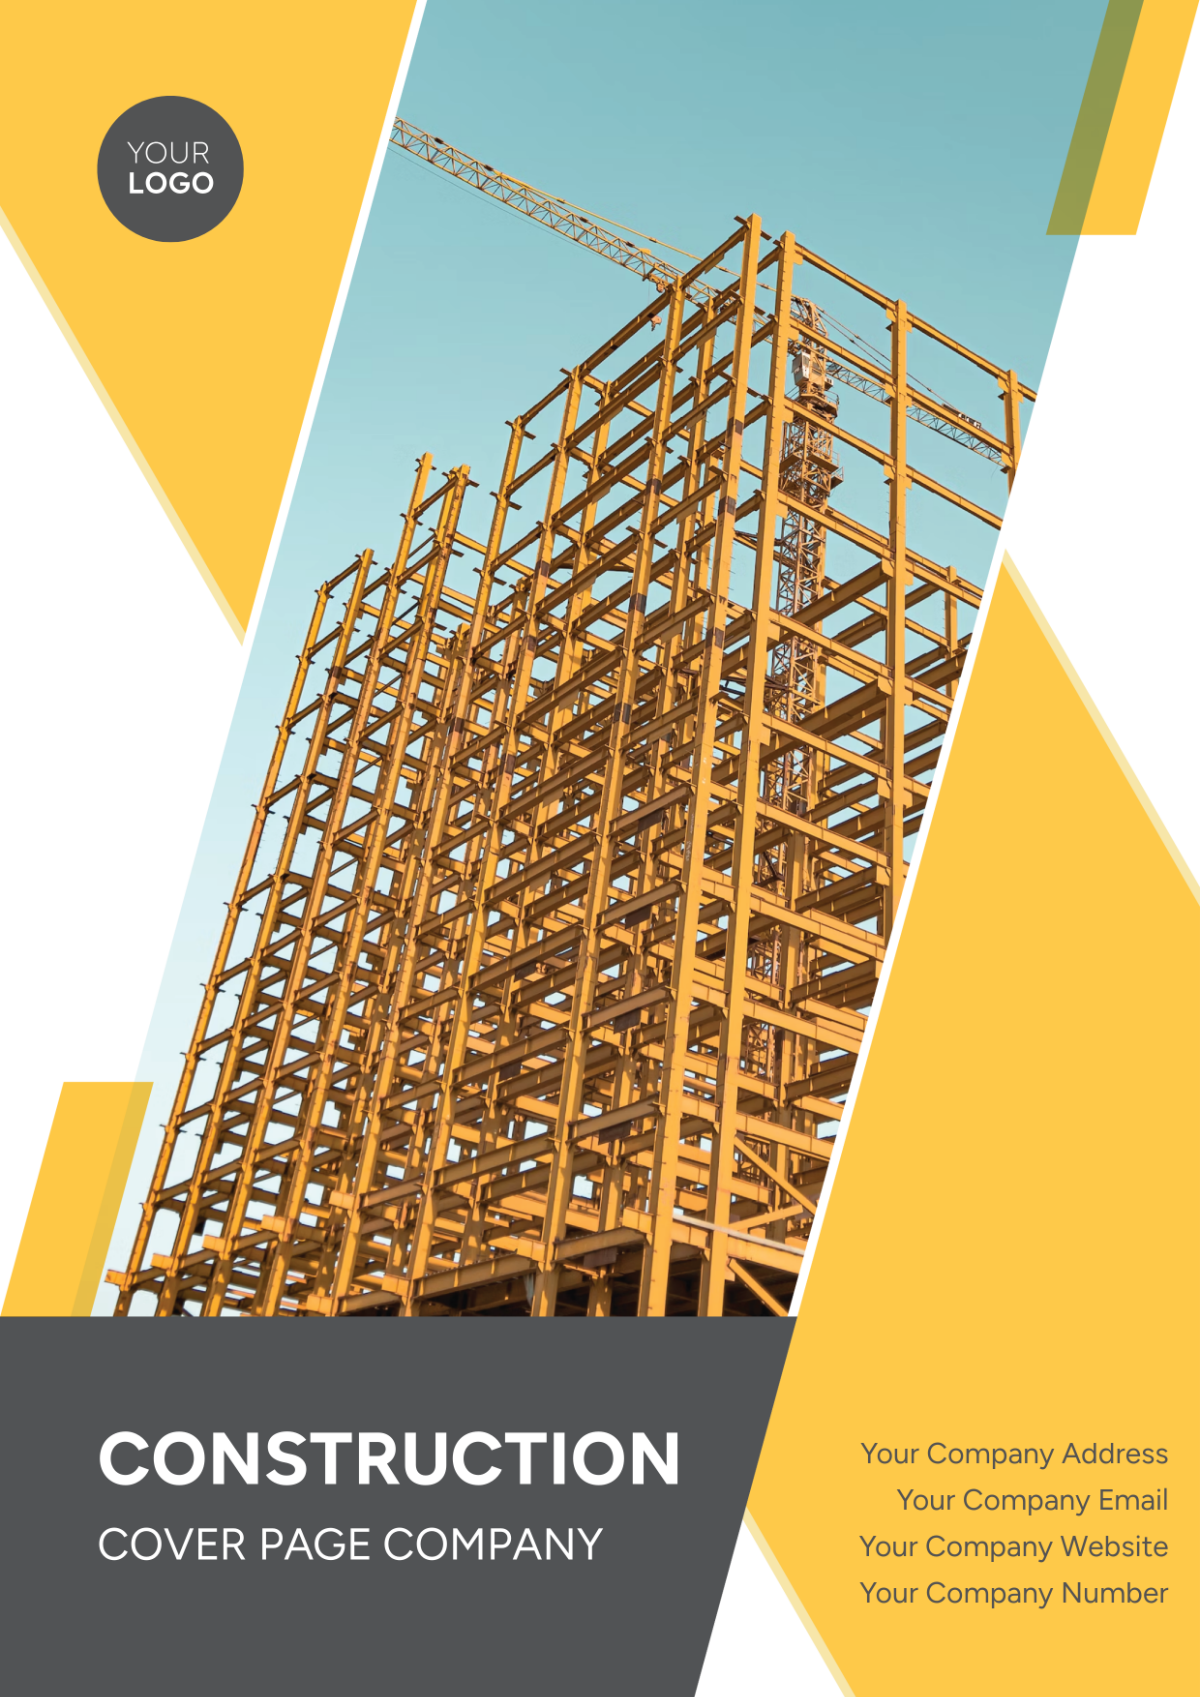 Construction Cover Page Company